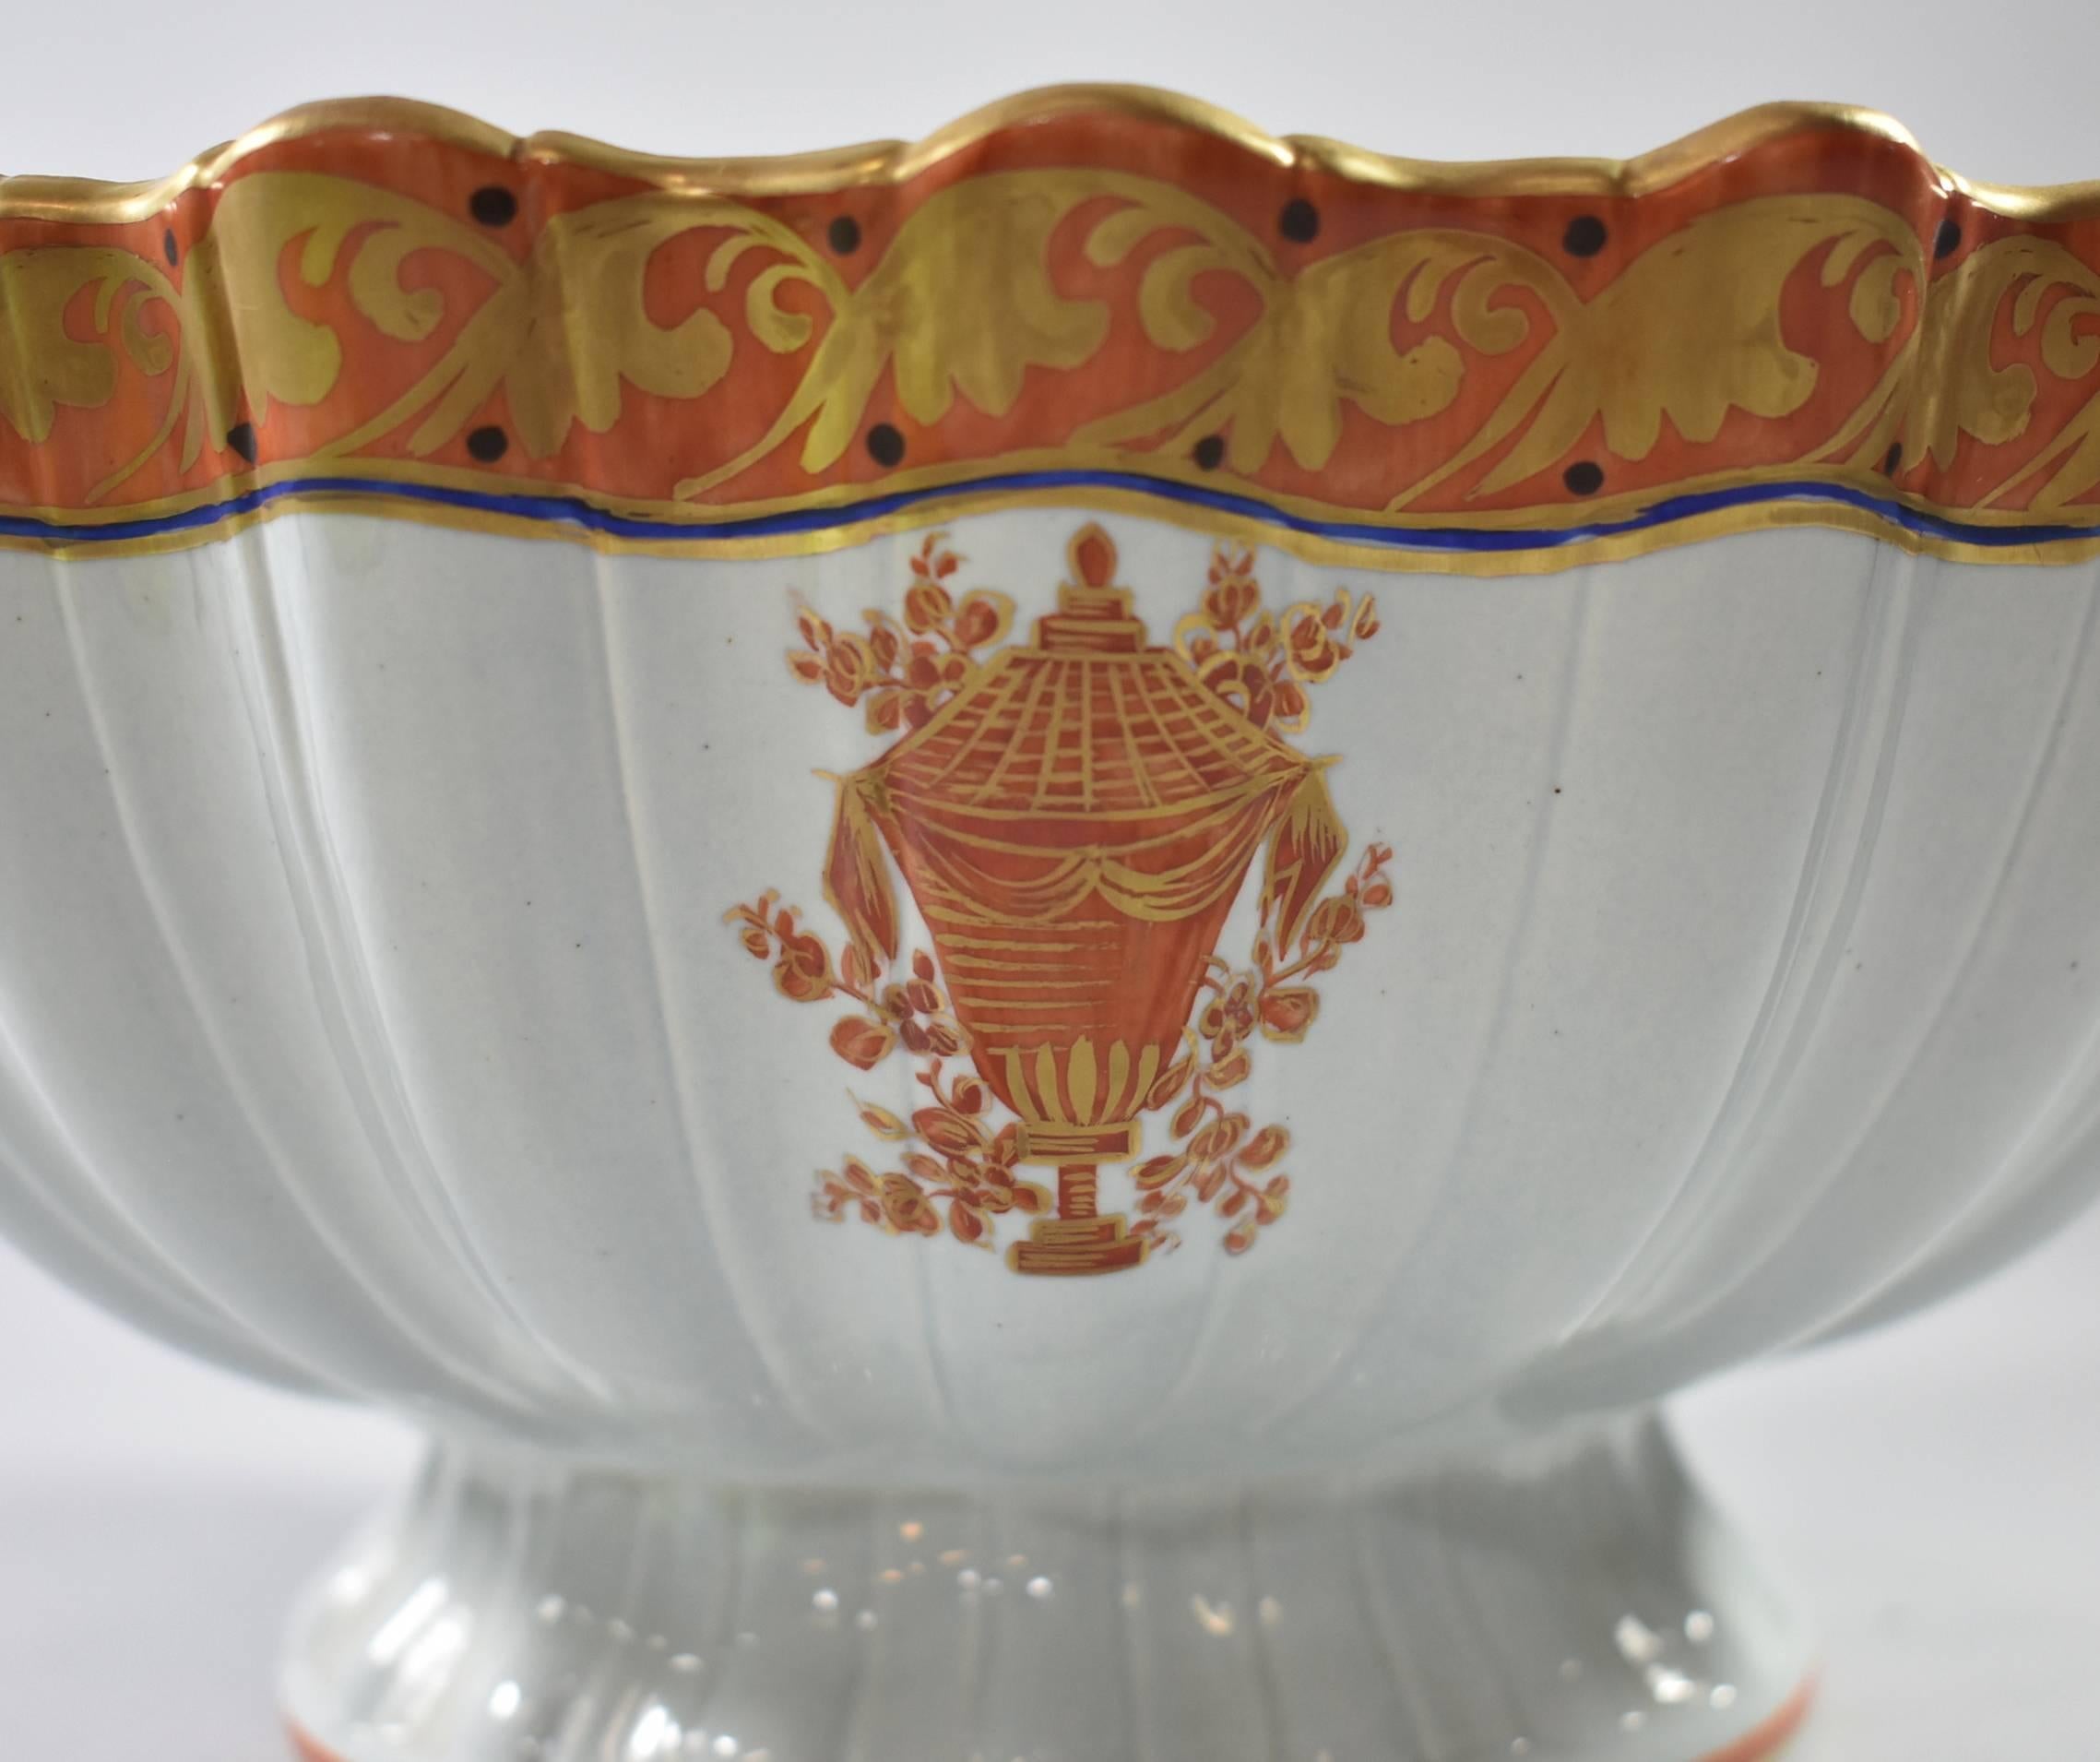 Modern Italian Porcelain Orange and Gold Detail Footed Bowl Scalloped Edge, Mottahedeh